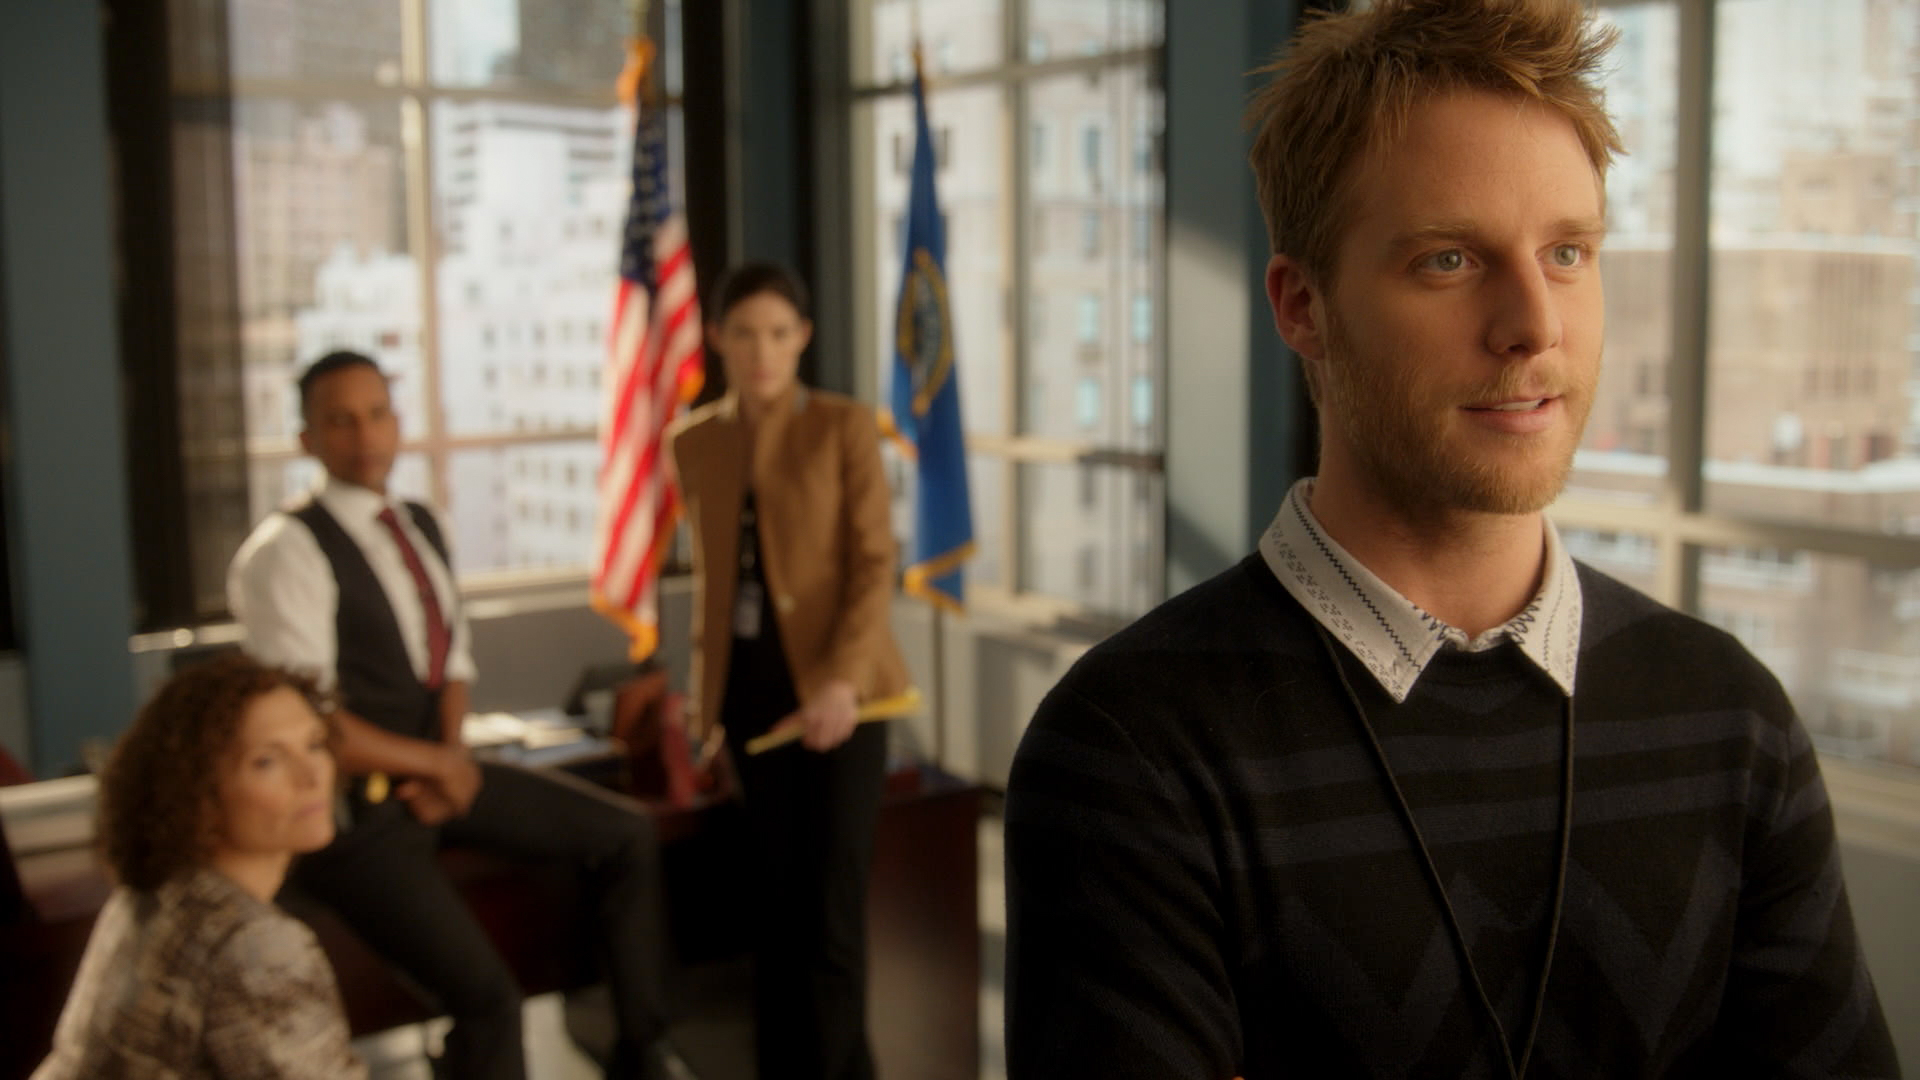 Limitless Season 1 finale airs on Tuesday, April 26 at 10/9c.